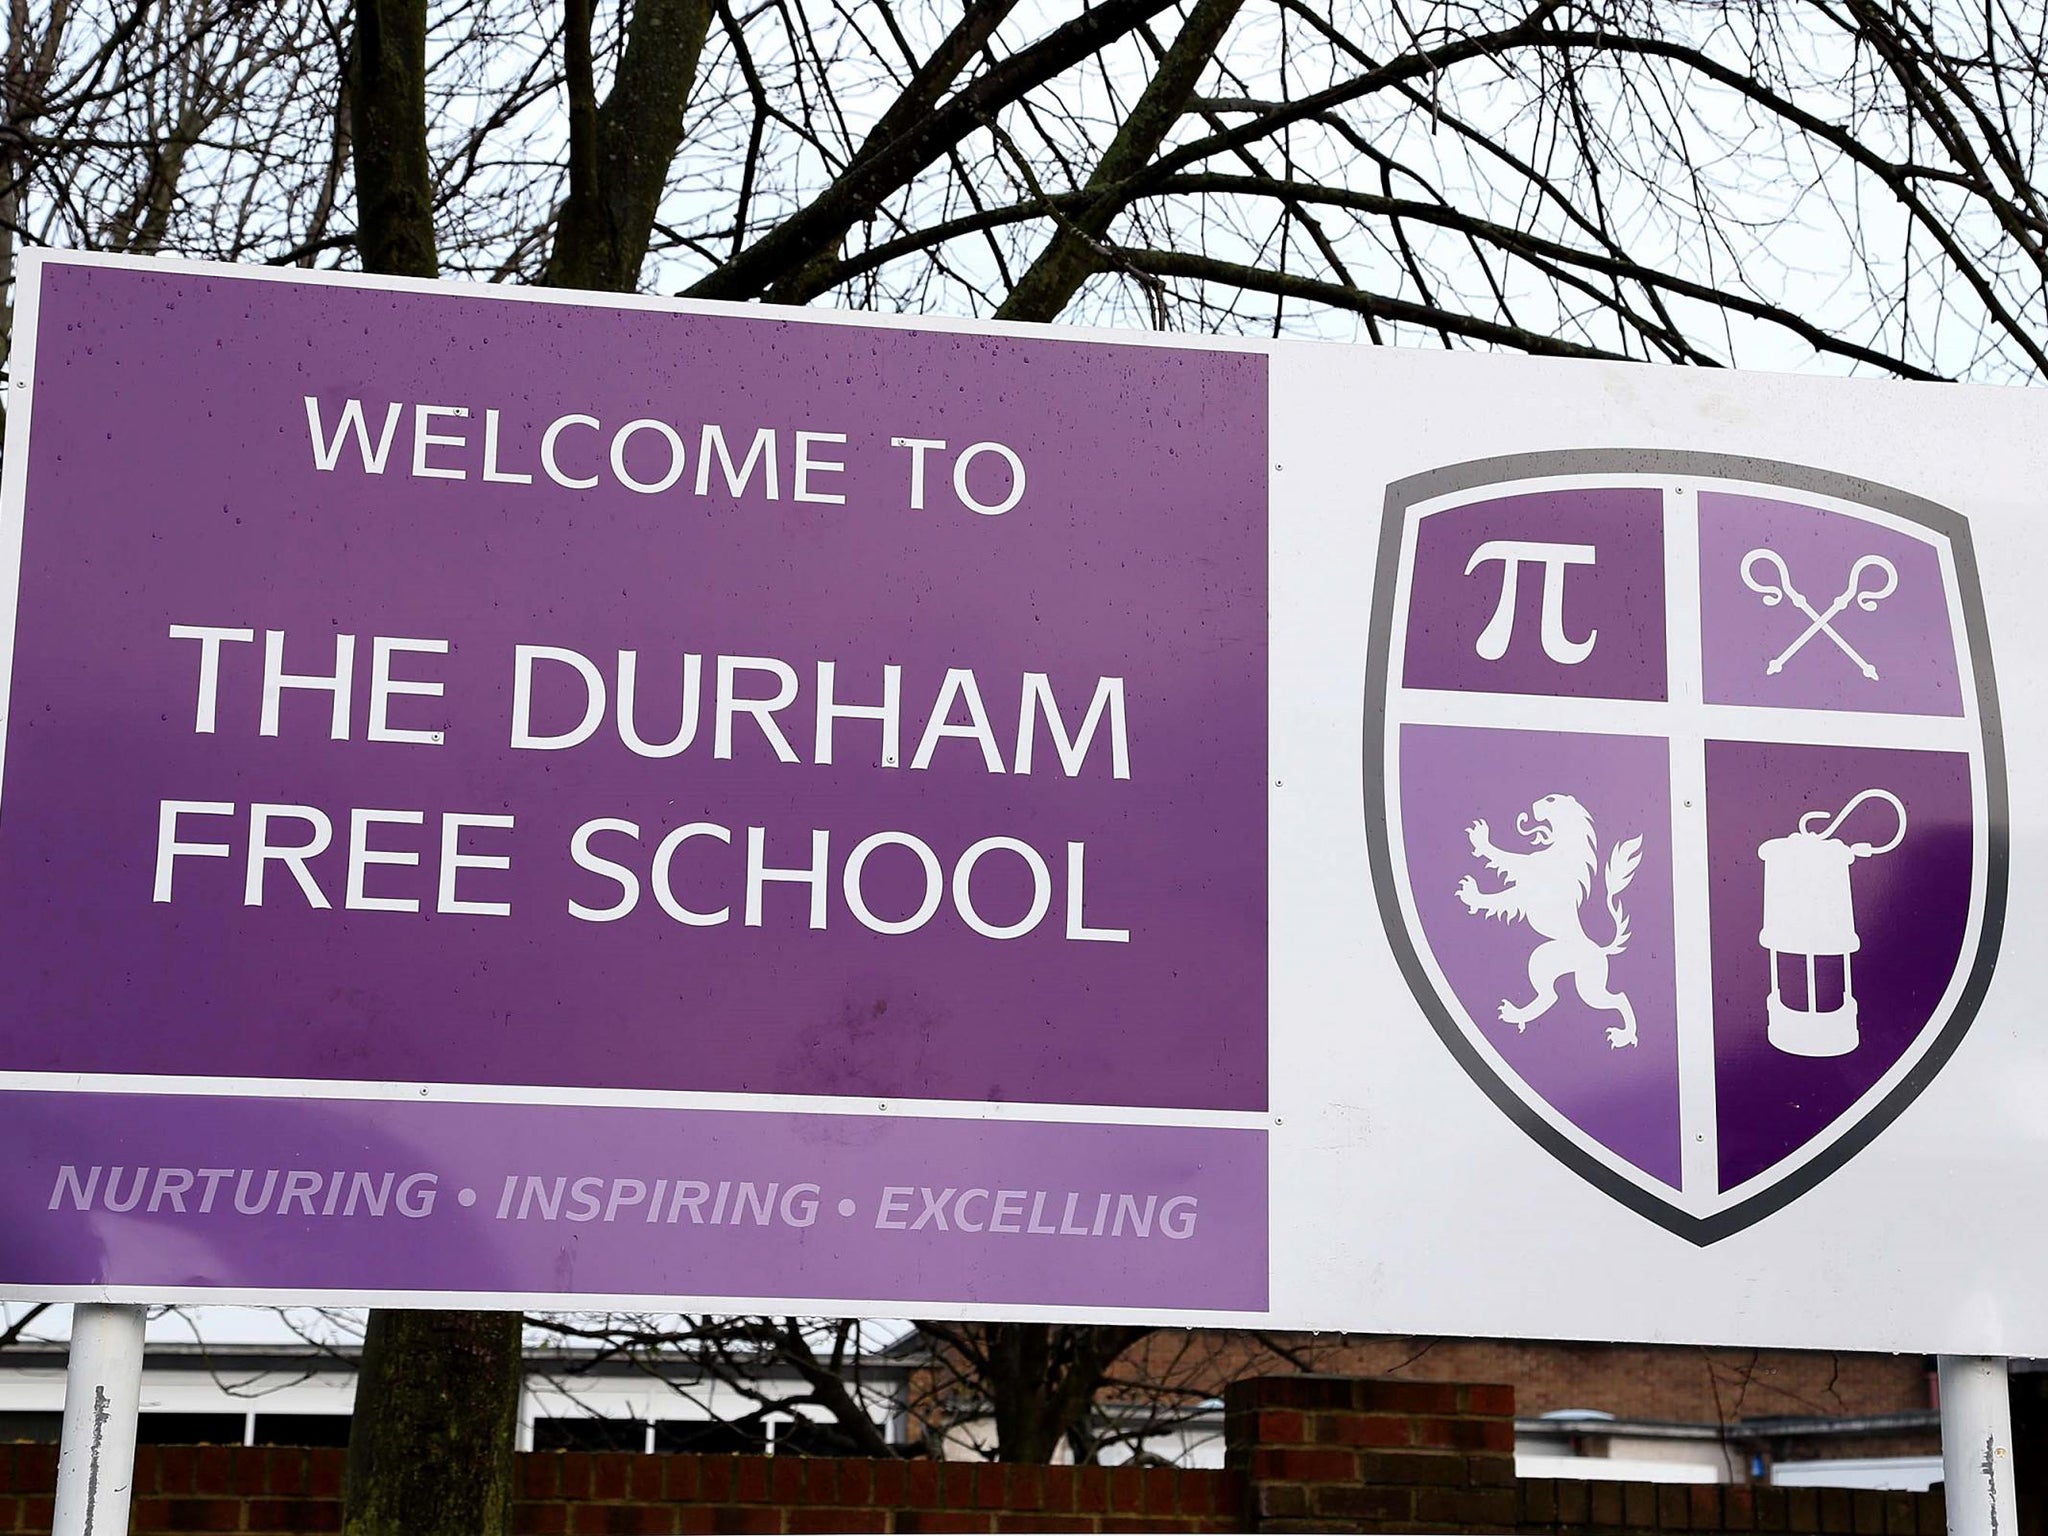 Durham Free School was ordered to close by Education Secretary Nicky Morgan after inspectors accused pupils of harbouring 'prejudiced views' of children from other faiths